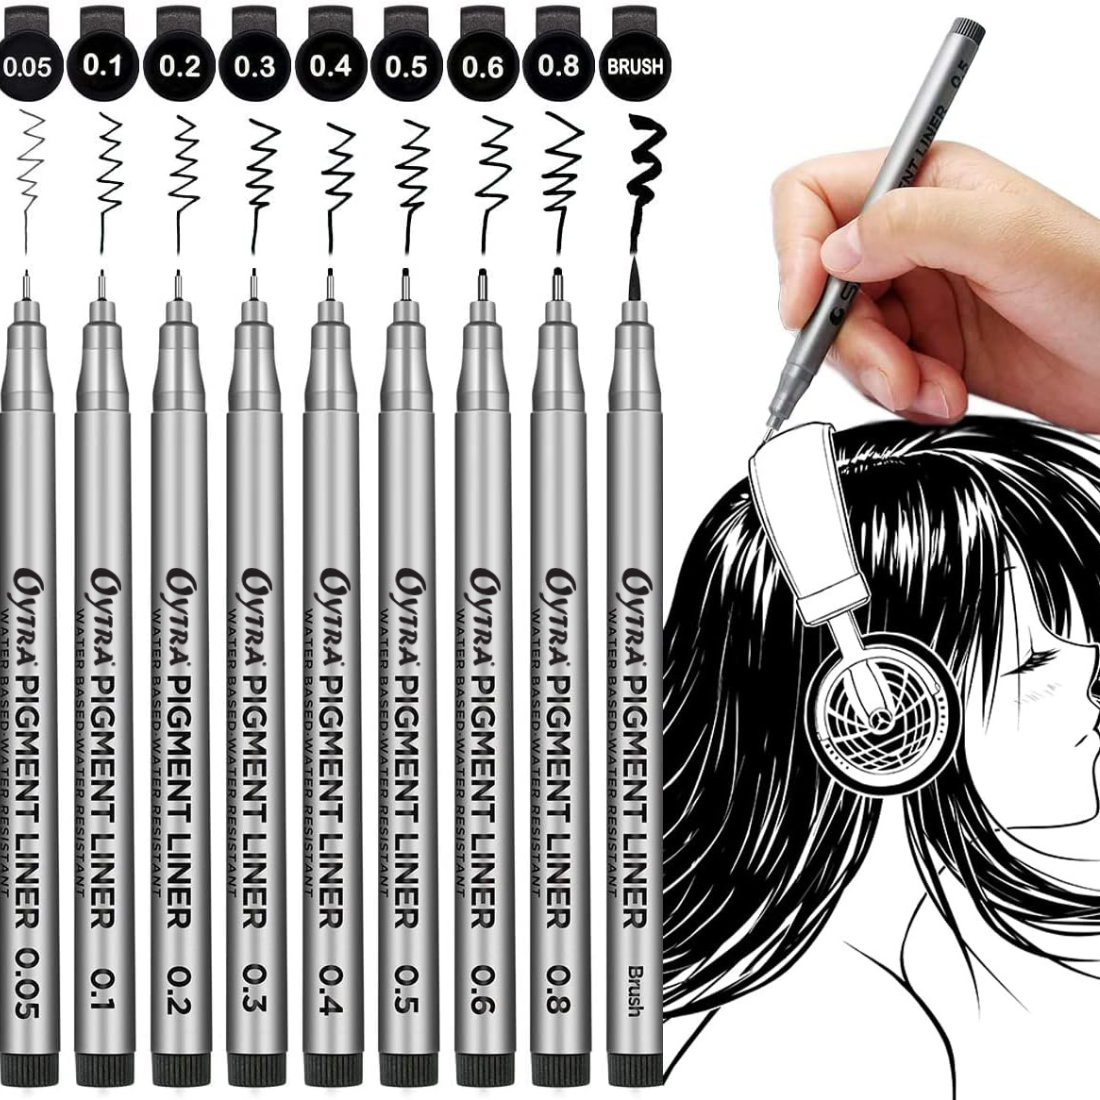 Ohuhu Micro Pen Fineliner Drawing Pens: 8 Sizes Fineliner Pens Pigment  Black Ink Assorted Point Sizes Waterproof for Writing Drawing Journaling